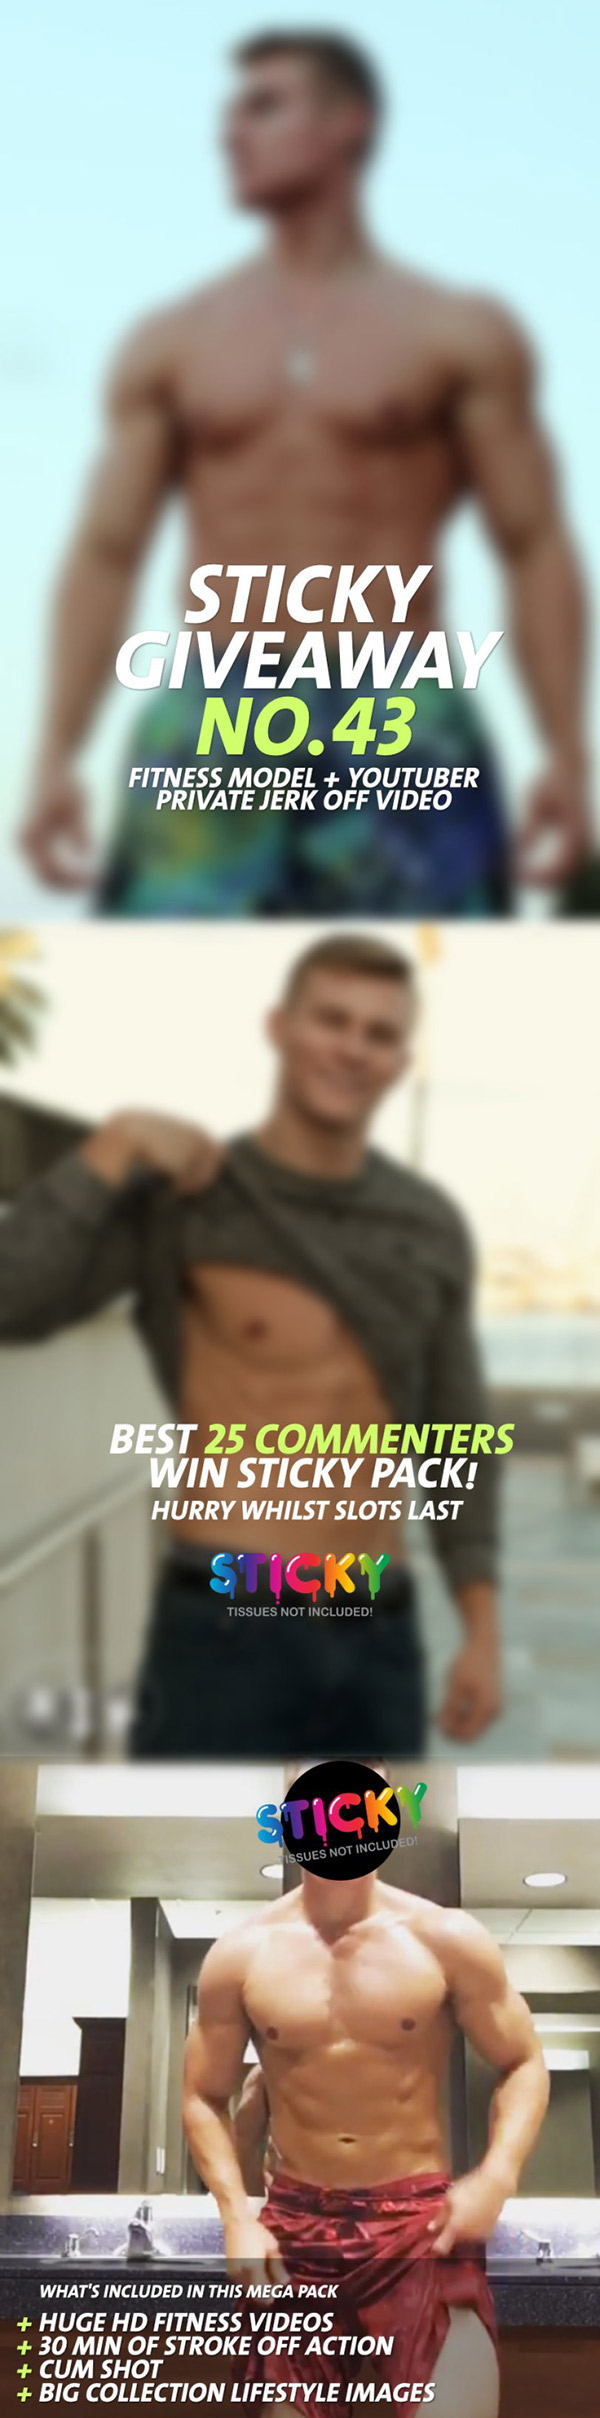 Sticky Giveaway No. 43